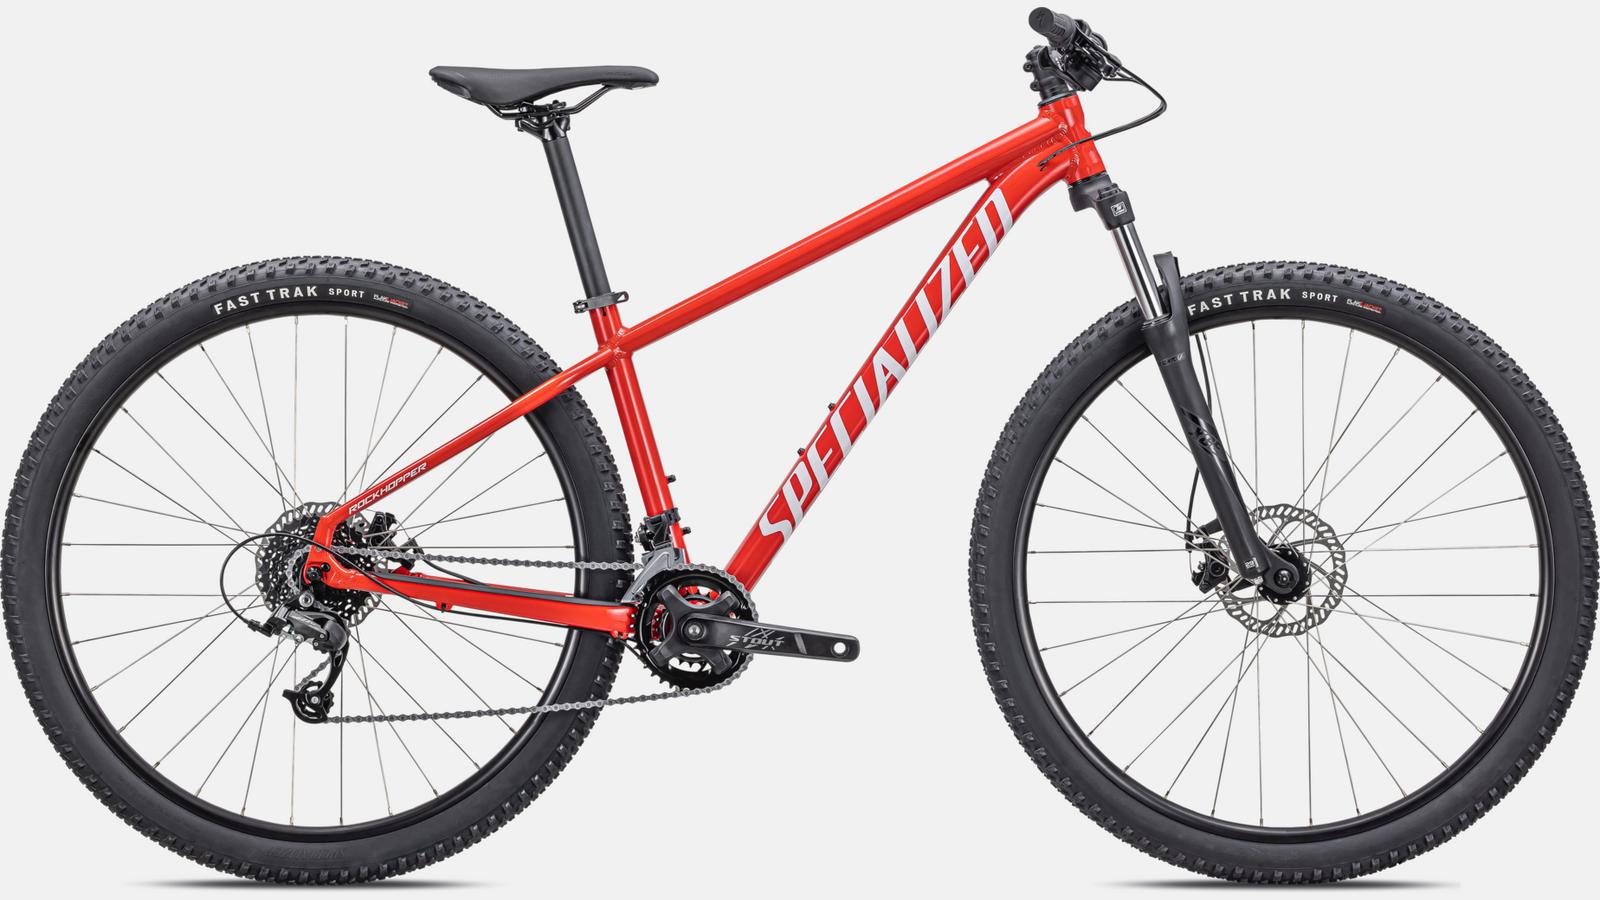 Paint for 2022 Specialized Rockhopper 27.5 - Gloss Flo Red